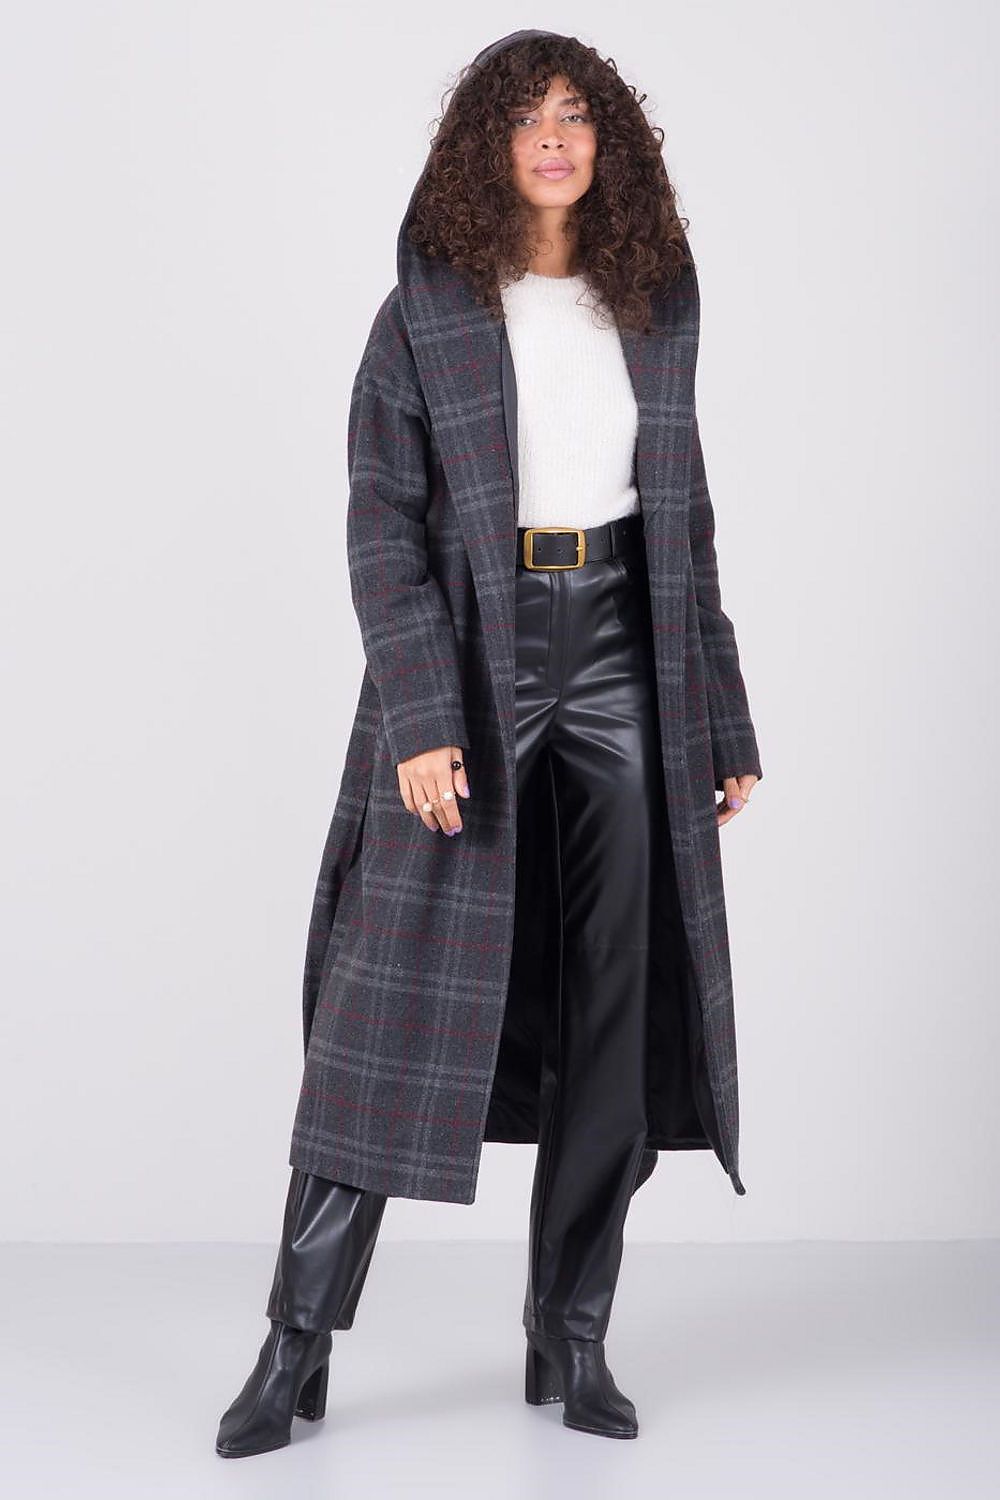 Coat Model 160268 by Sally Fashion - LOLA LUXE